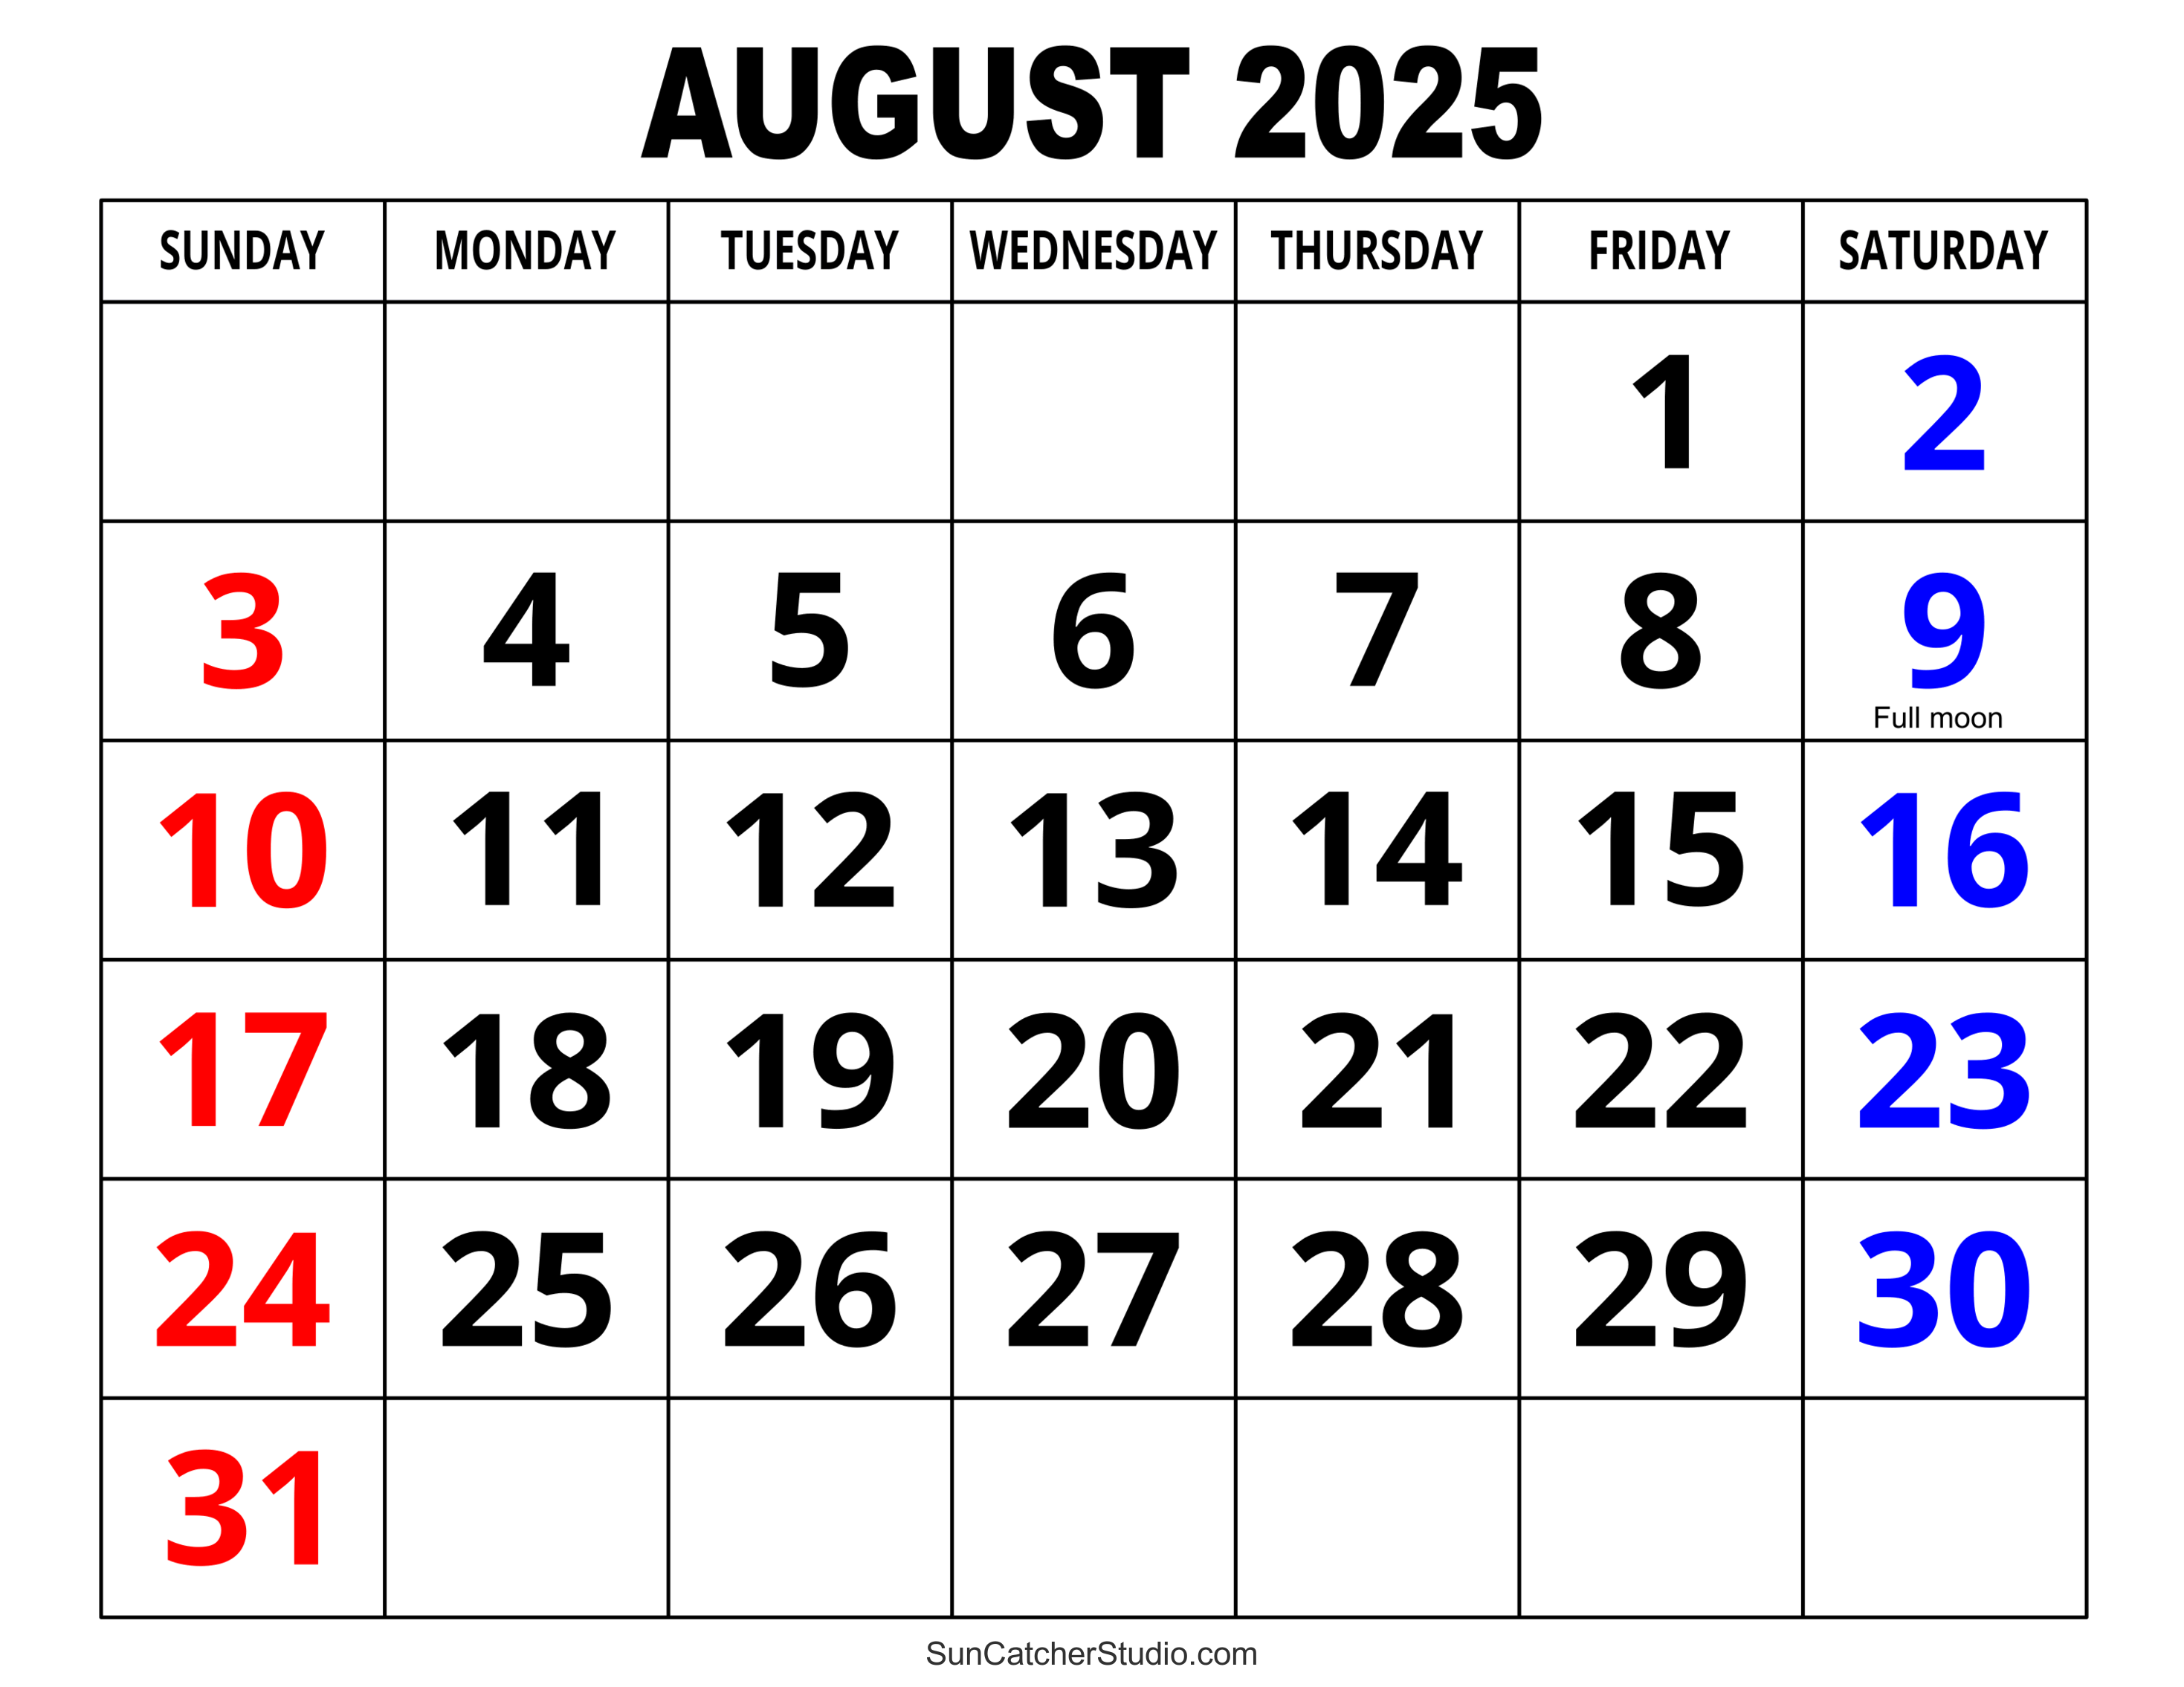 august-2025-calendar-free-printable-diy-projects-patterns-monograms-designs-templates